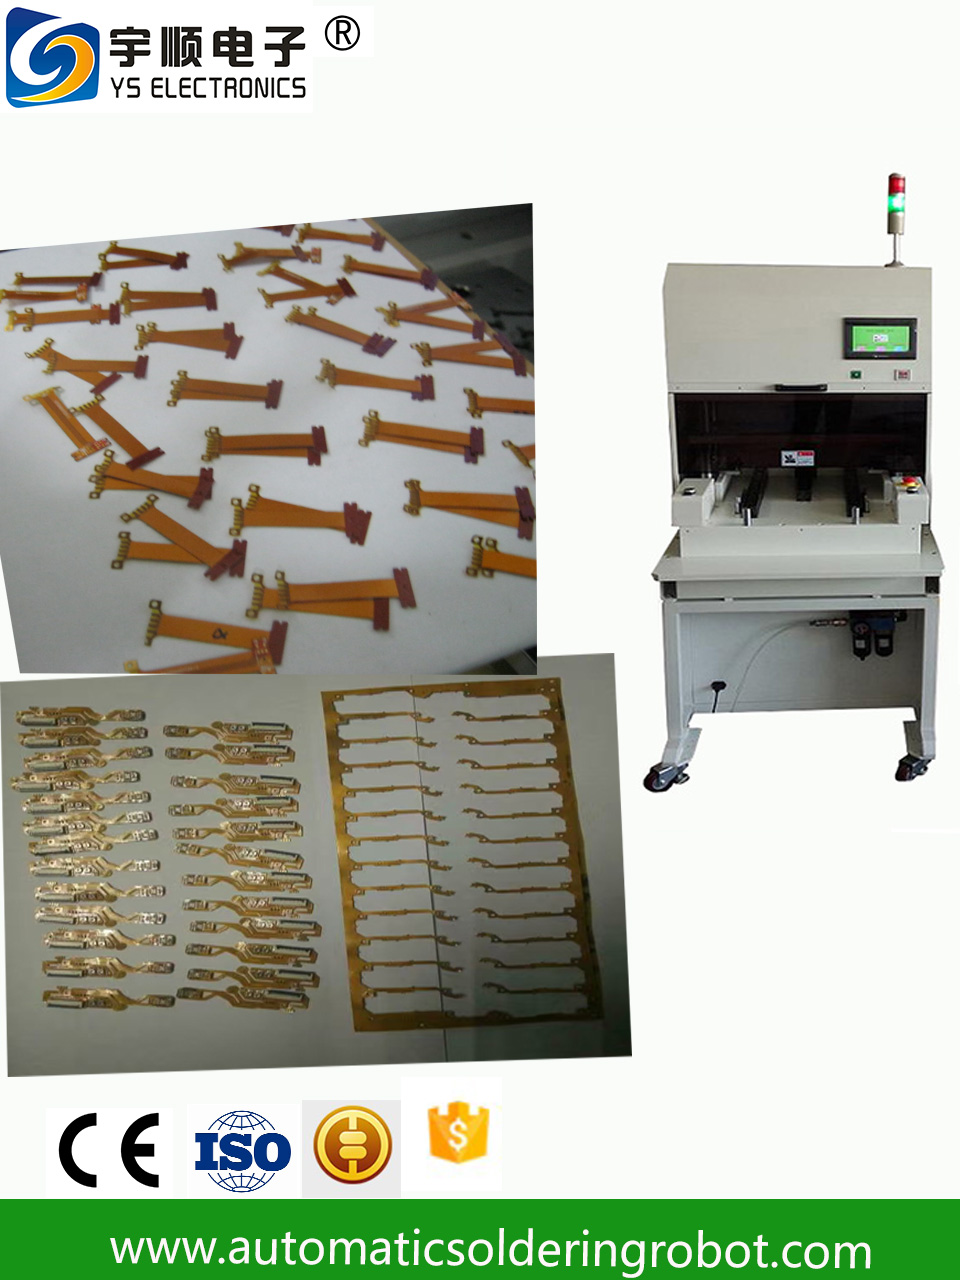 Professional Fpc / Pcb Punch Mold  High Precision Pcb Depanelizer For Cutting Pcb Board- Professional Fpc / Pcb Punch Mold  High Precision Pcb Depanelizer For Cutting Pcb Board Manufacturers, Suppliers and Exporters on pcbcuttingmachine.com Electronics Production Machinery